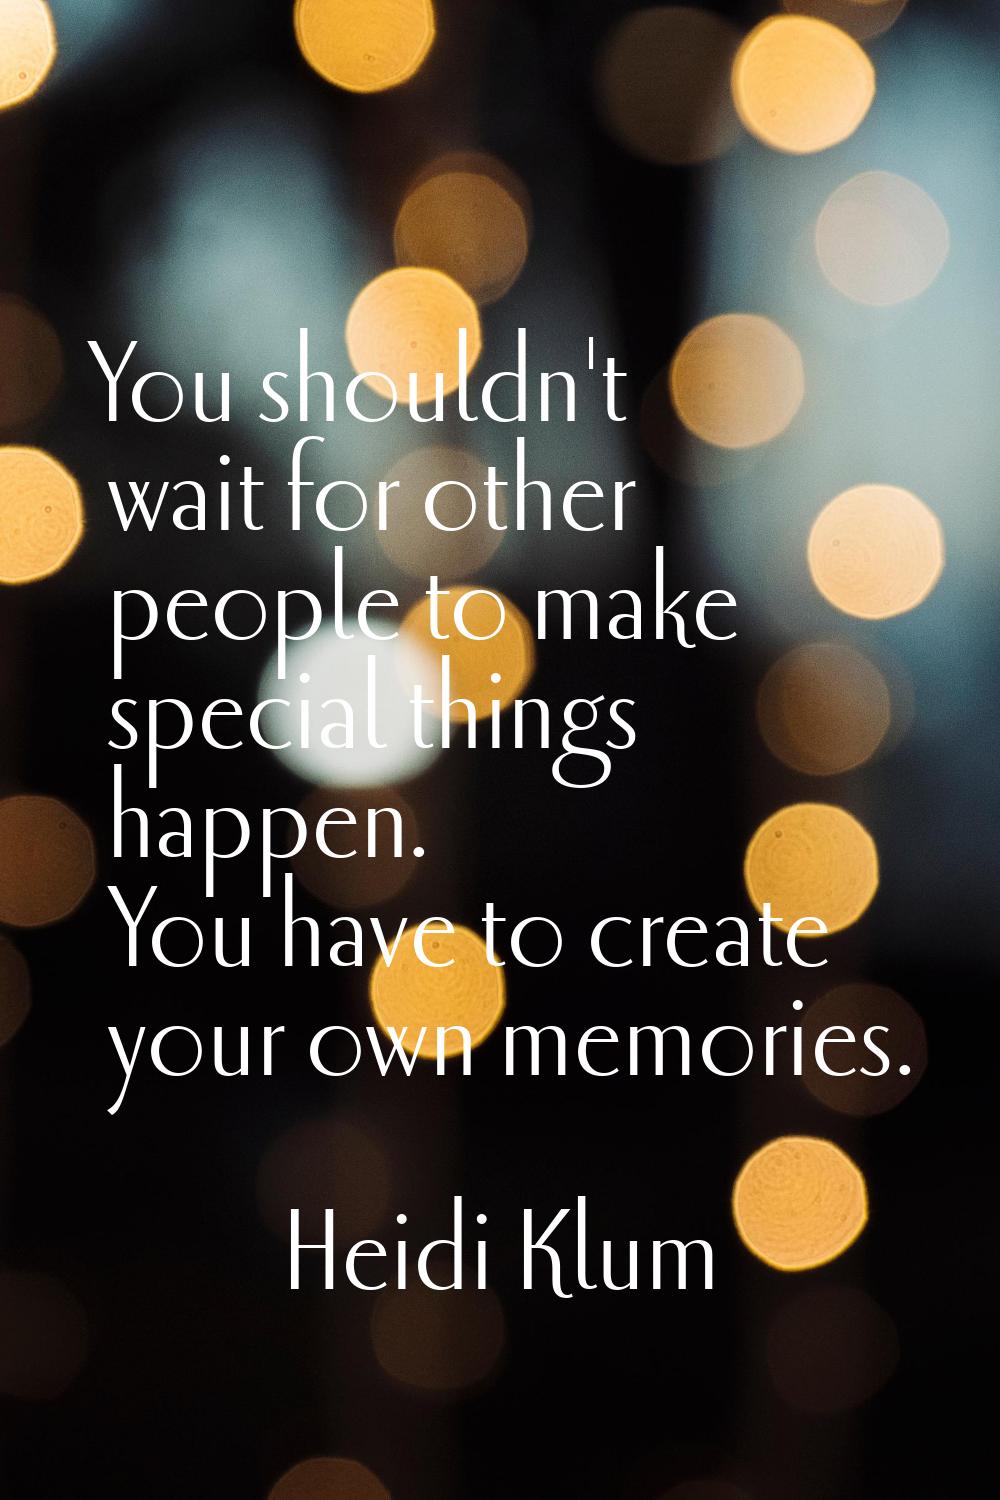 You shouldn't wait for other people to make special things happen. You have to create your own memo